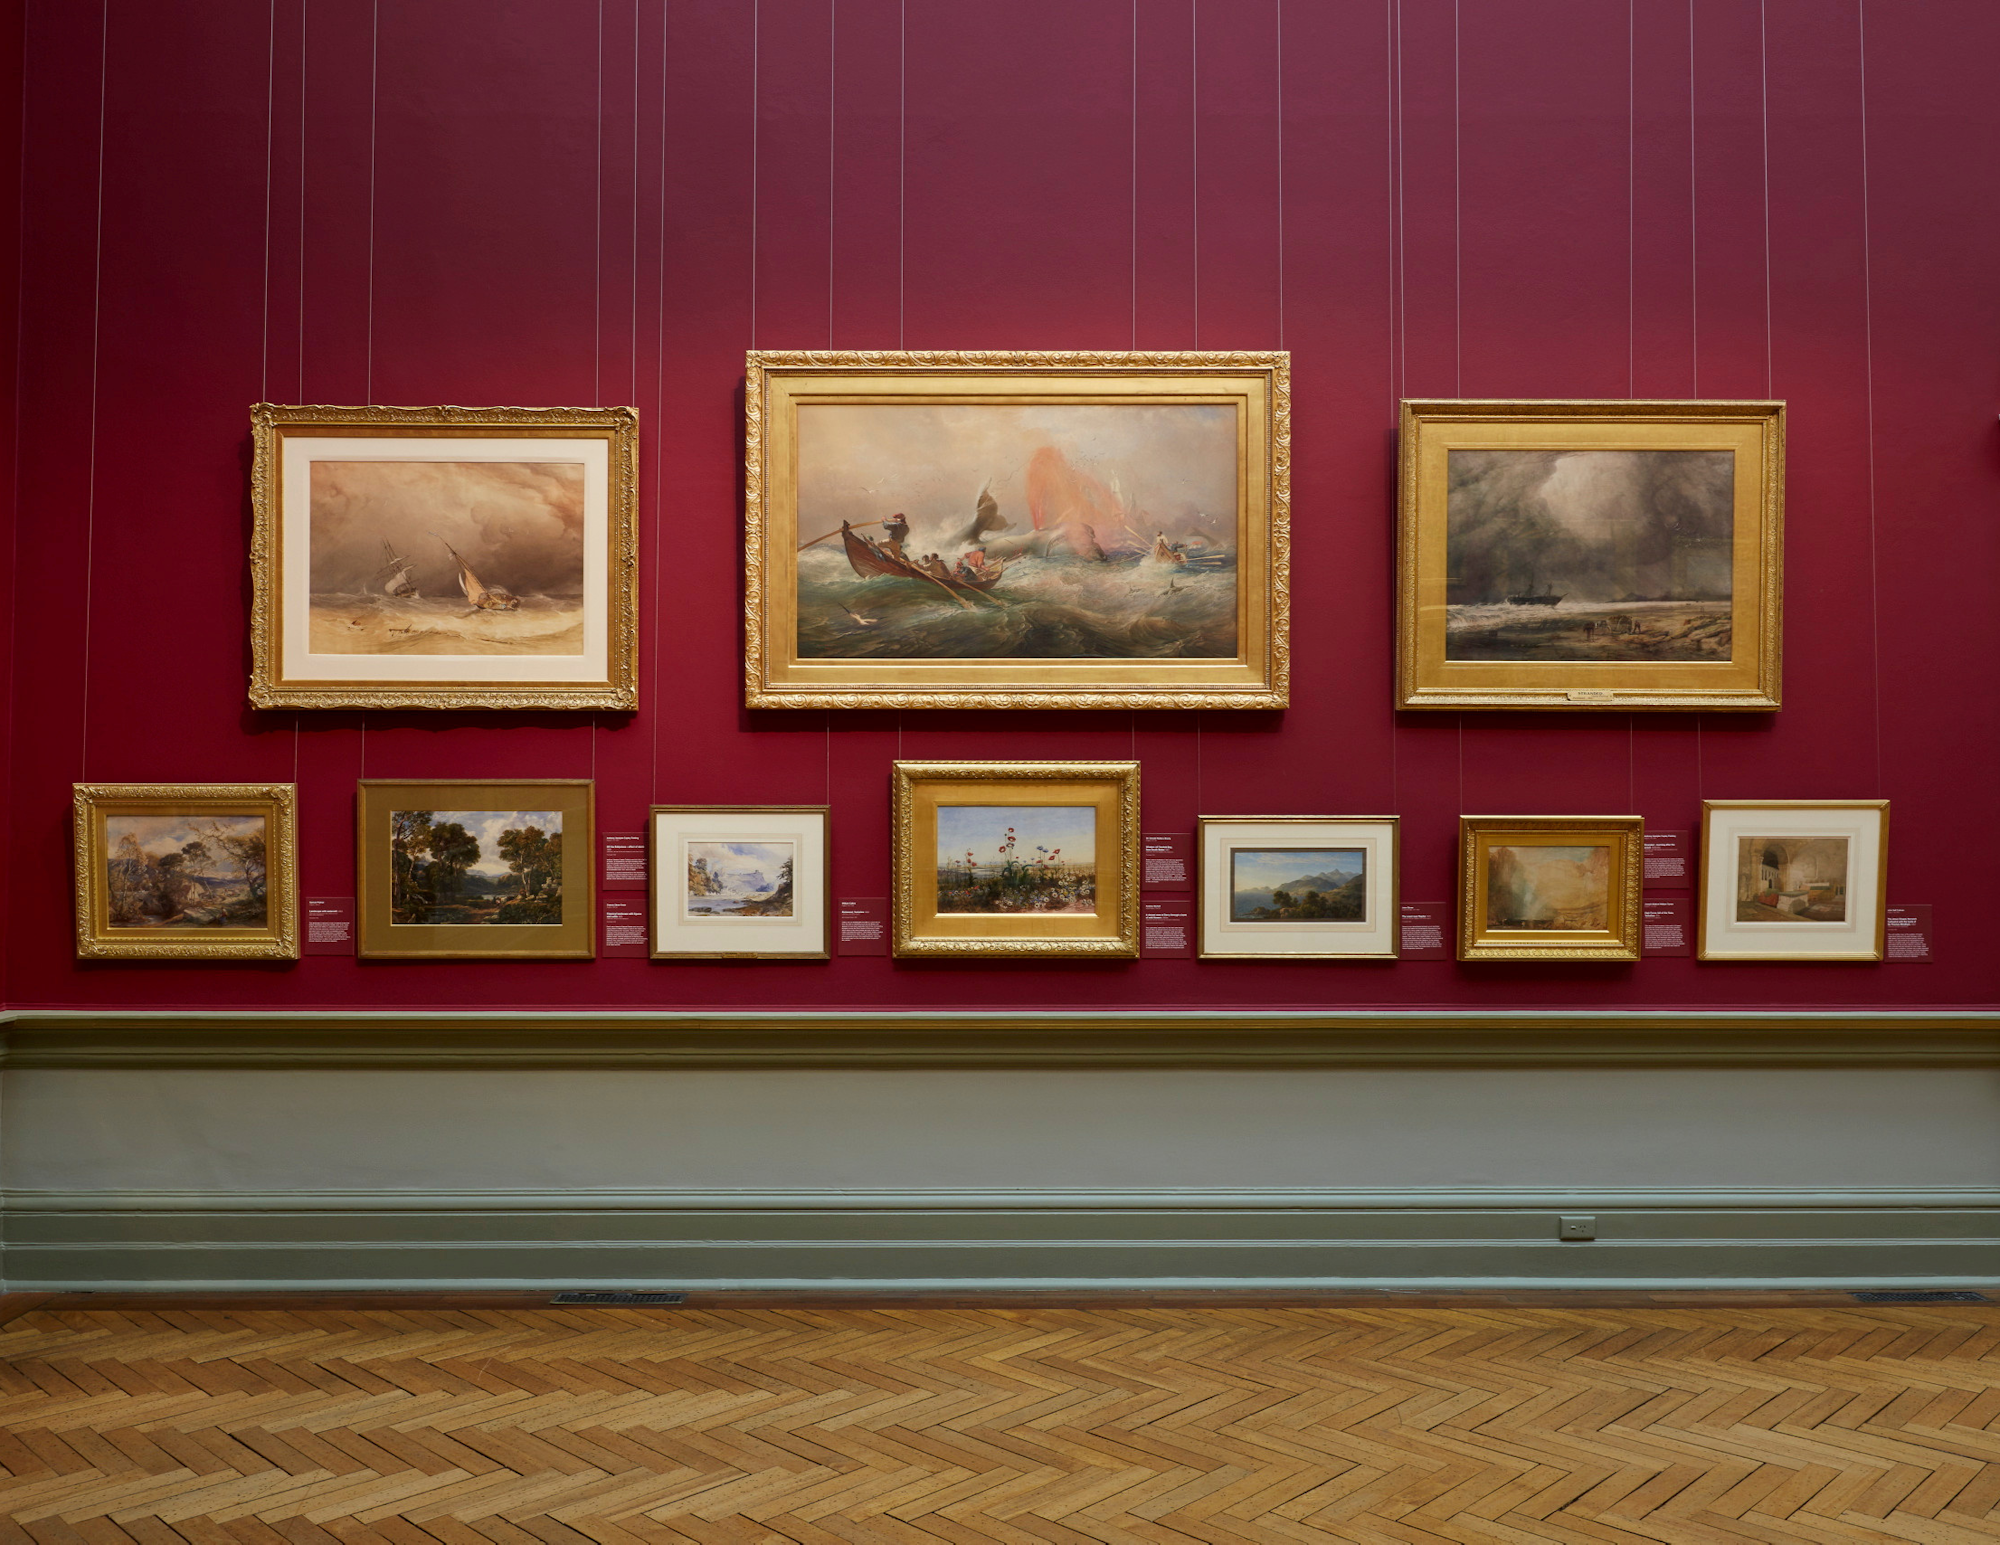 19th-century watercolours from the Gallery’s collection on display in the Grand Courts